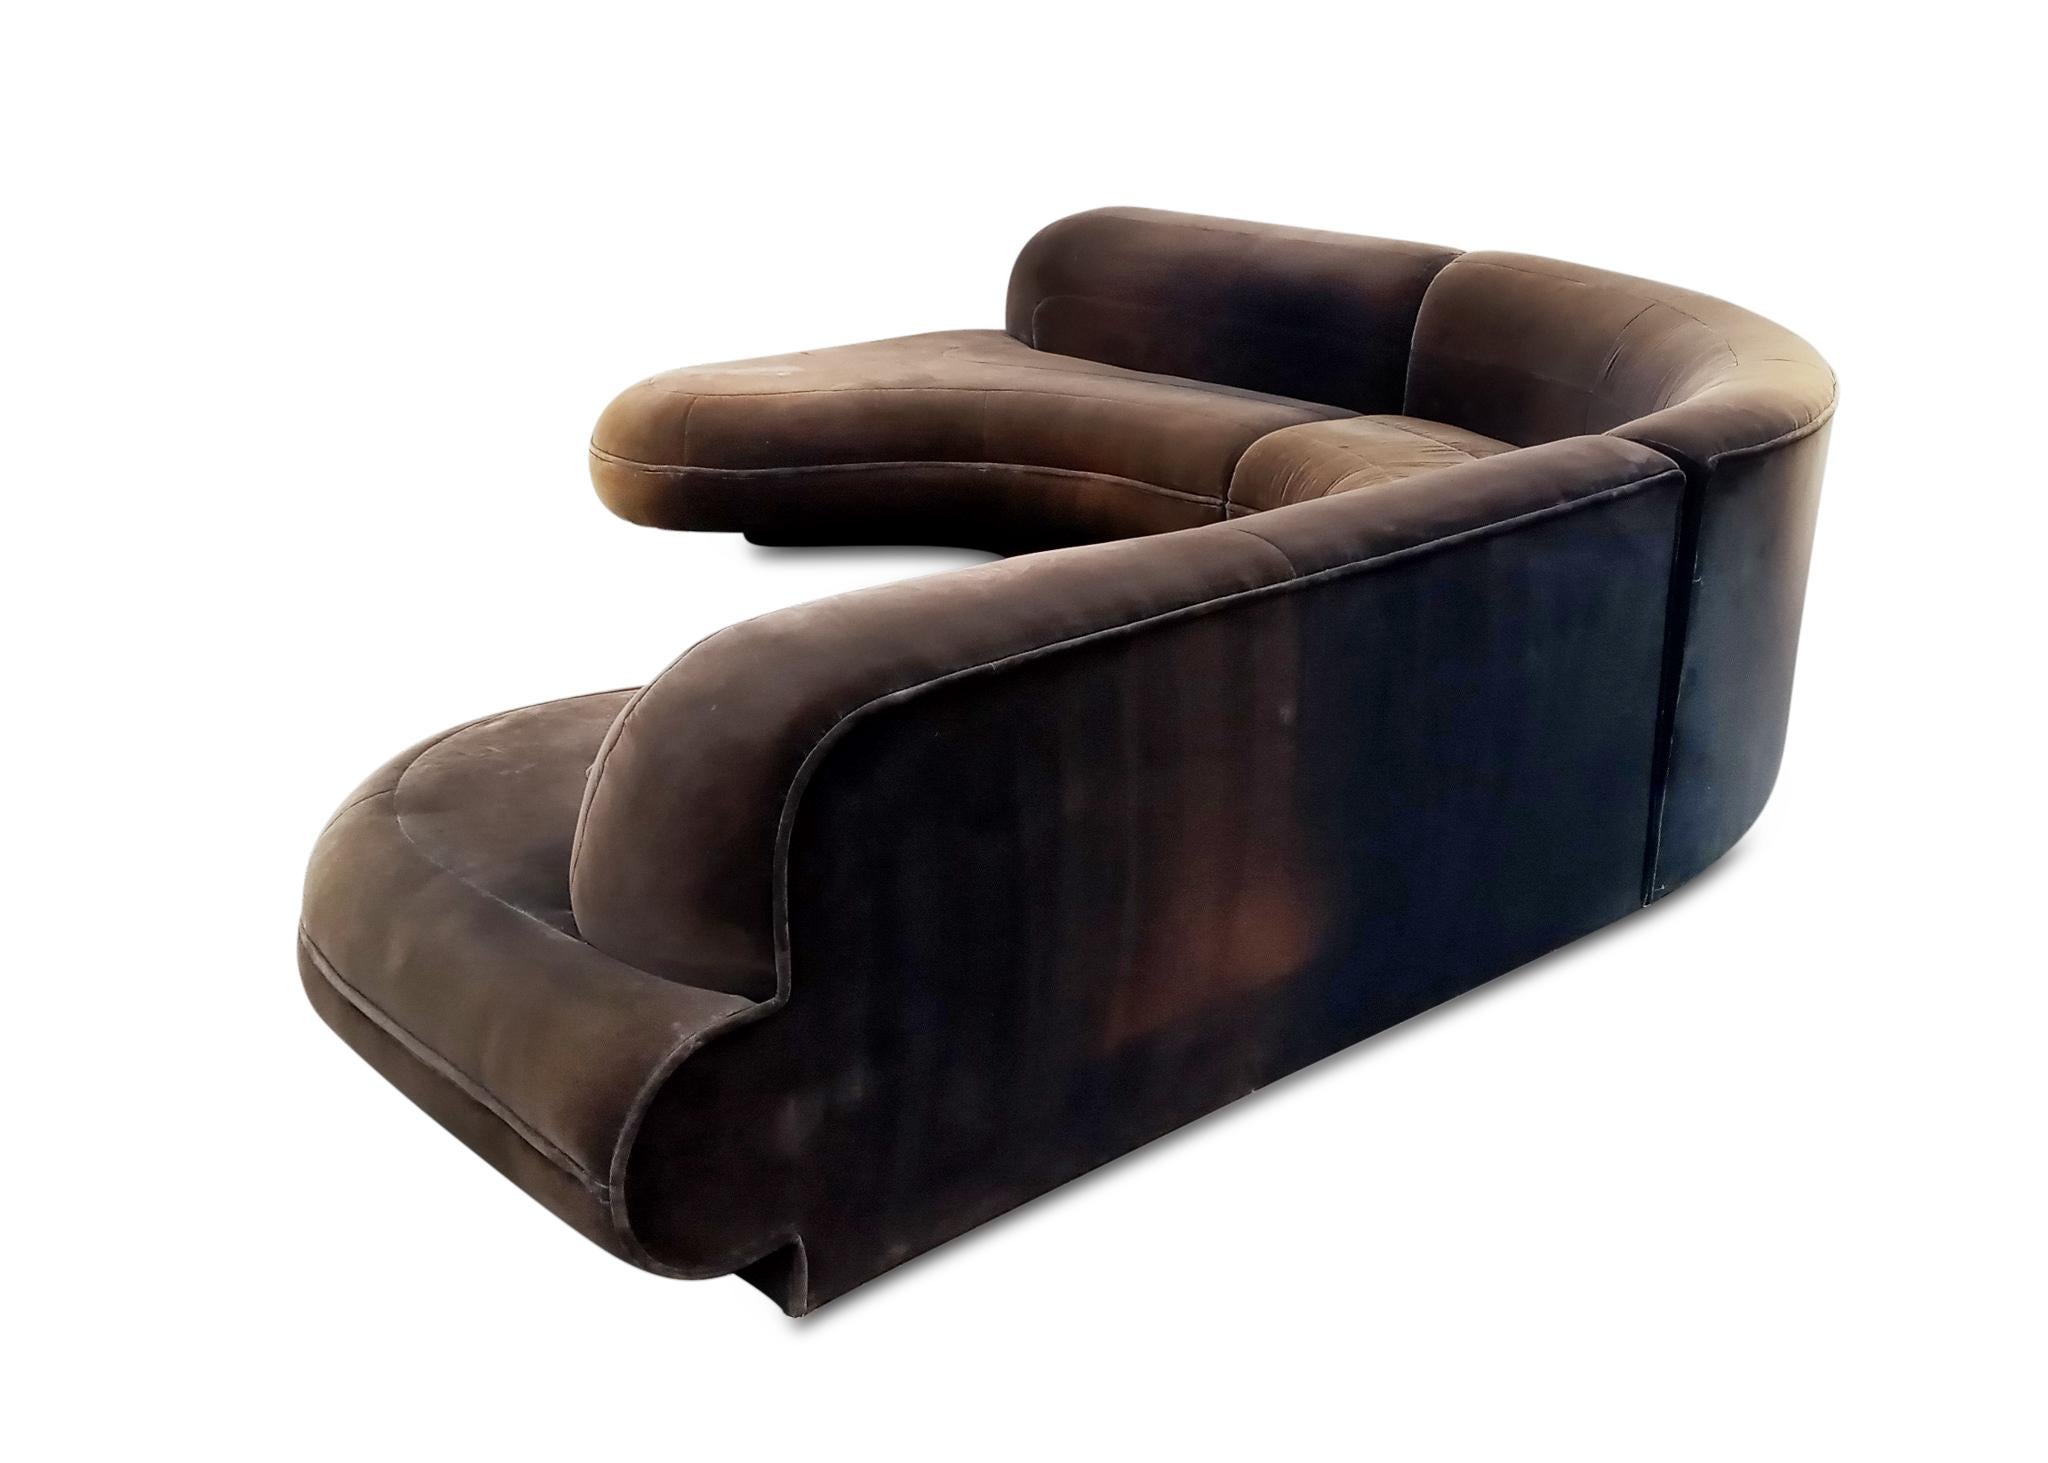 Late 20th Century M. Fillmore Harty, Preview Super Sculptural Signed 3 Part Sectional Sofa 1990s